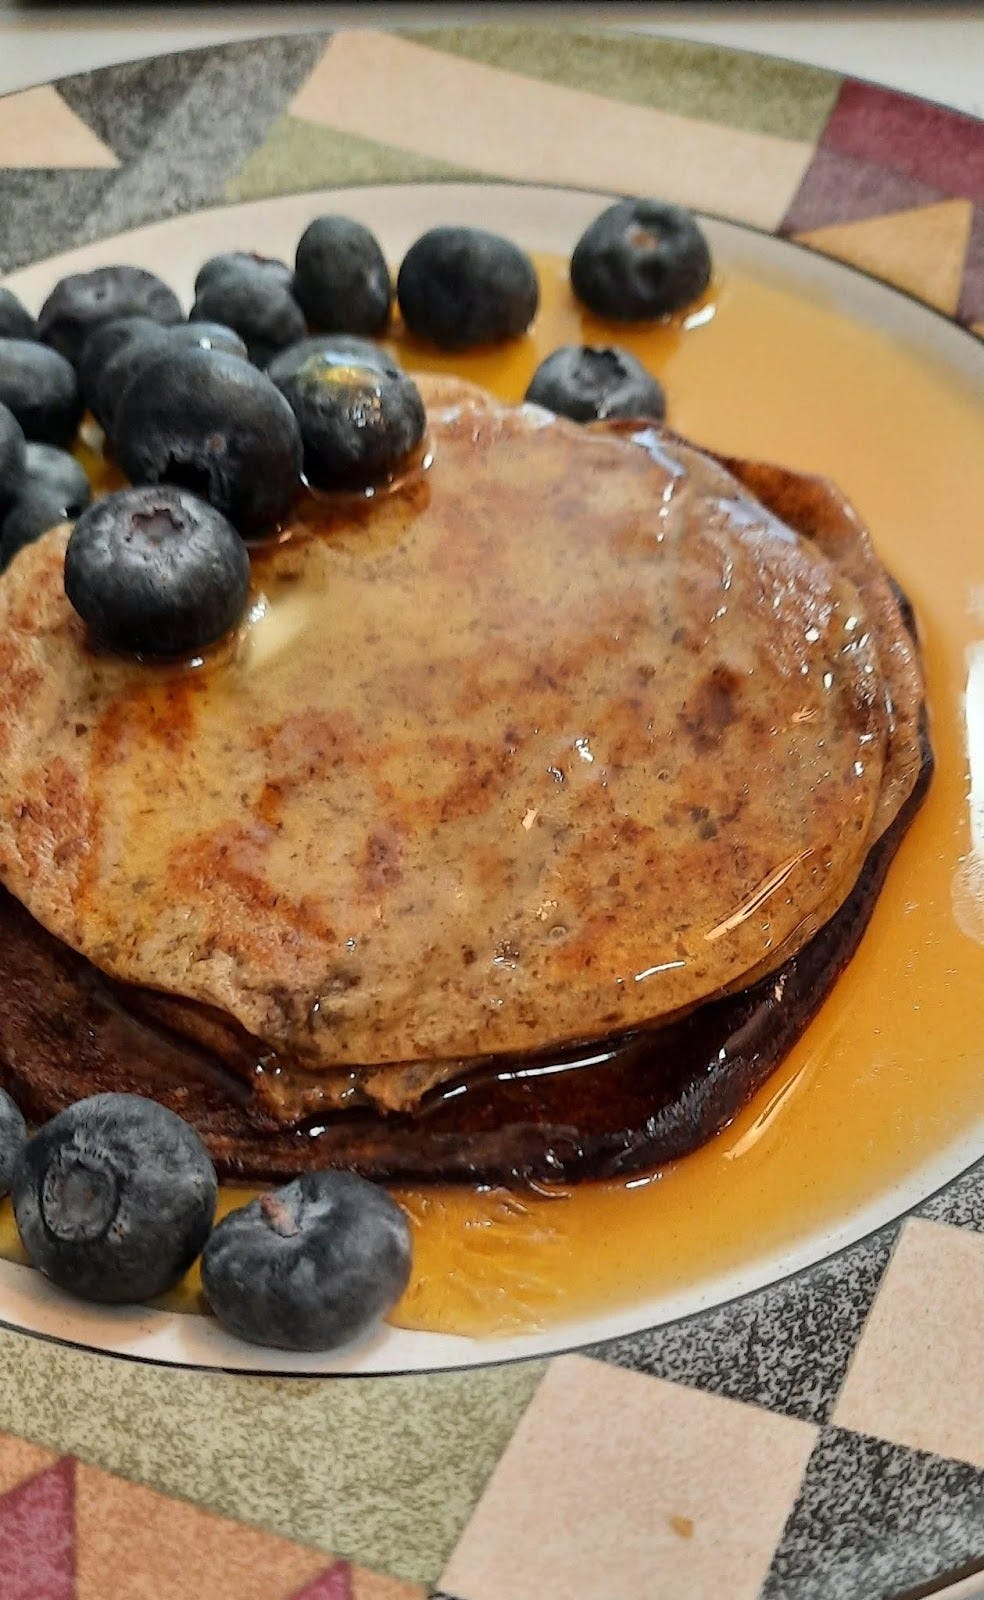 Pancakes, blueberries and too much maple syrup on a white plate with a colorful rim.